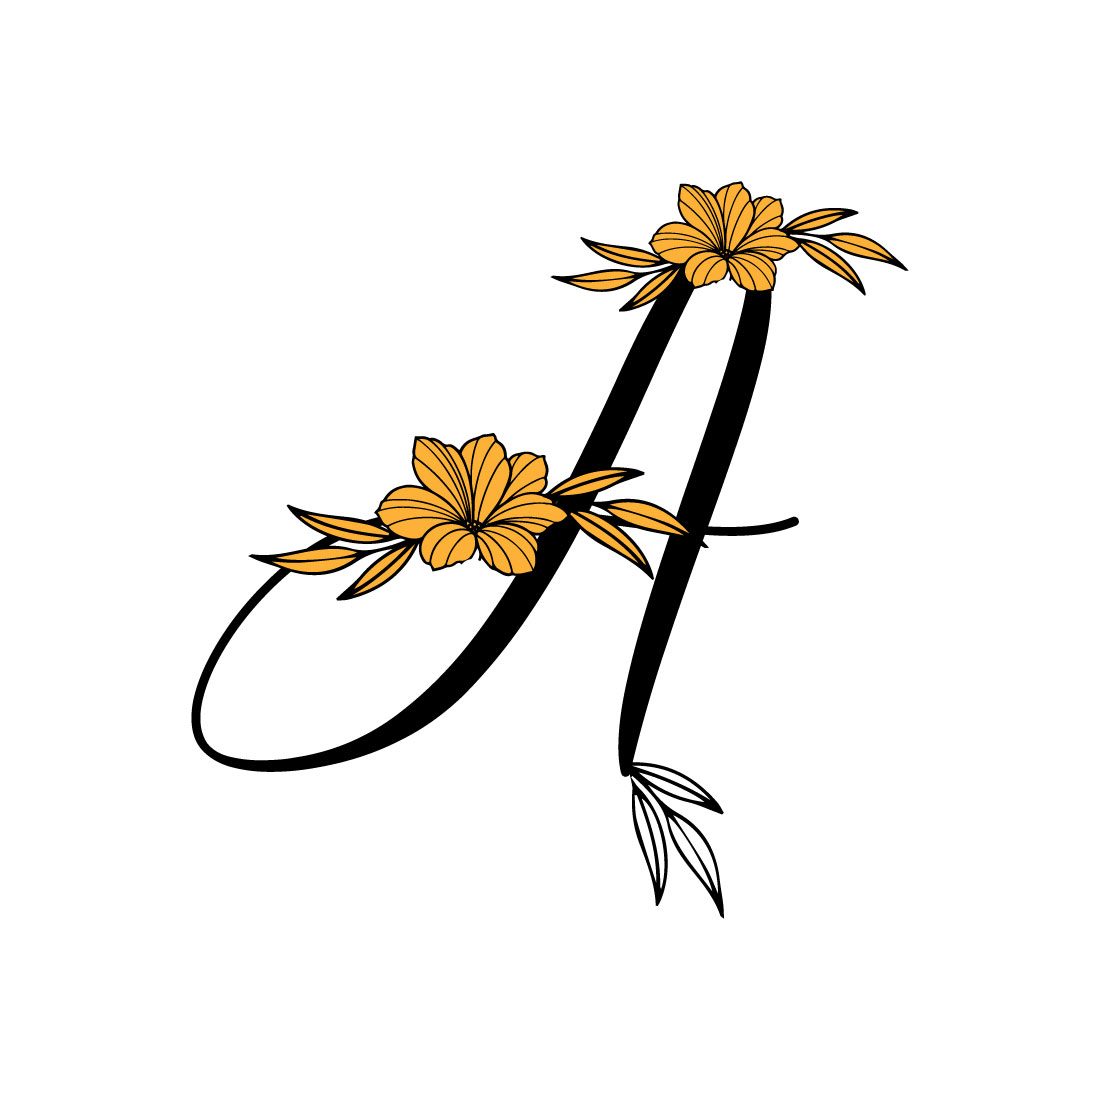 Free A Letter Flower Logo cover image.